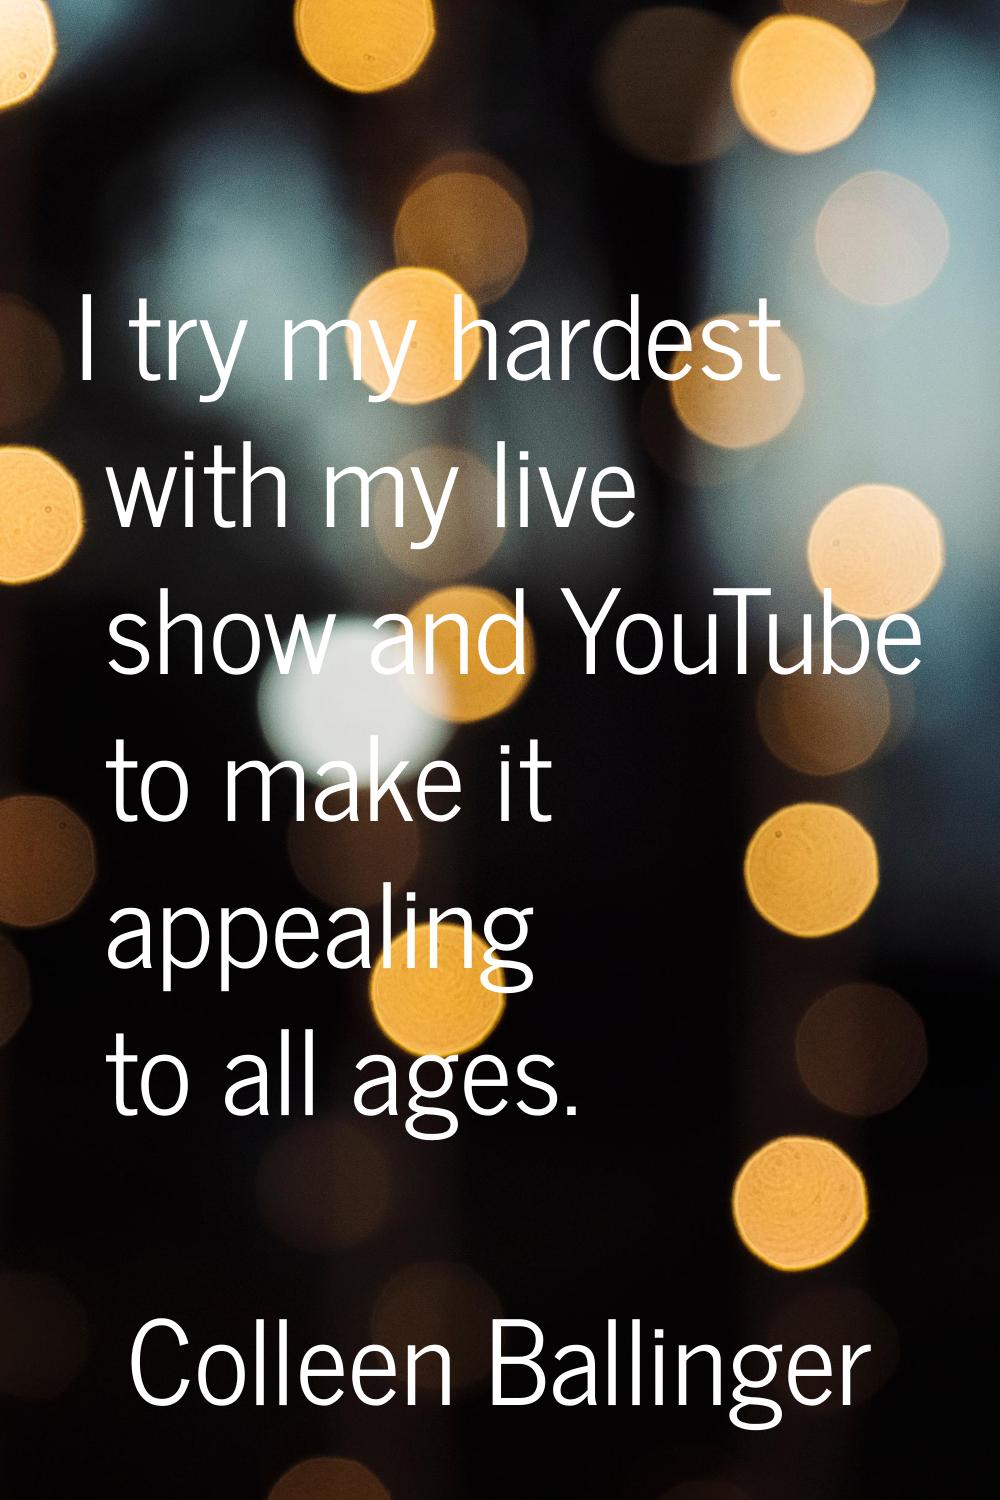 I try my hardest with my live show and YouTube to make it appealing to all ages.